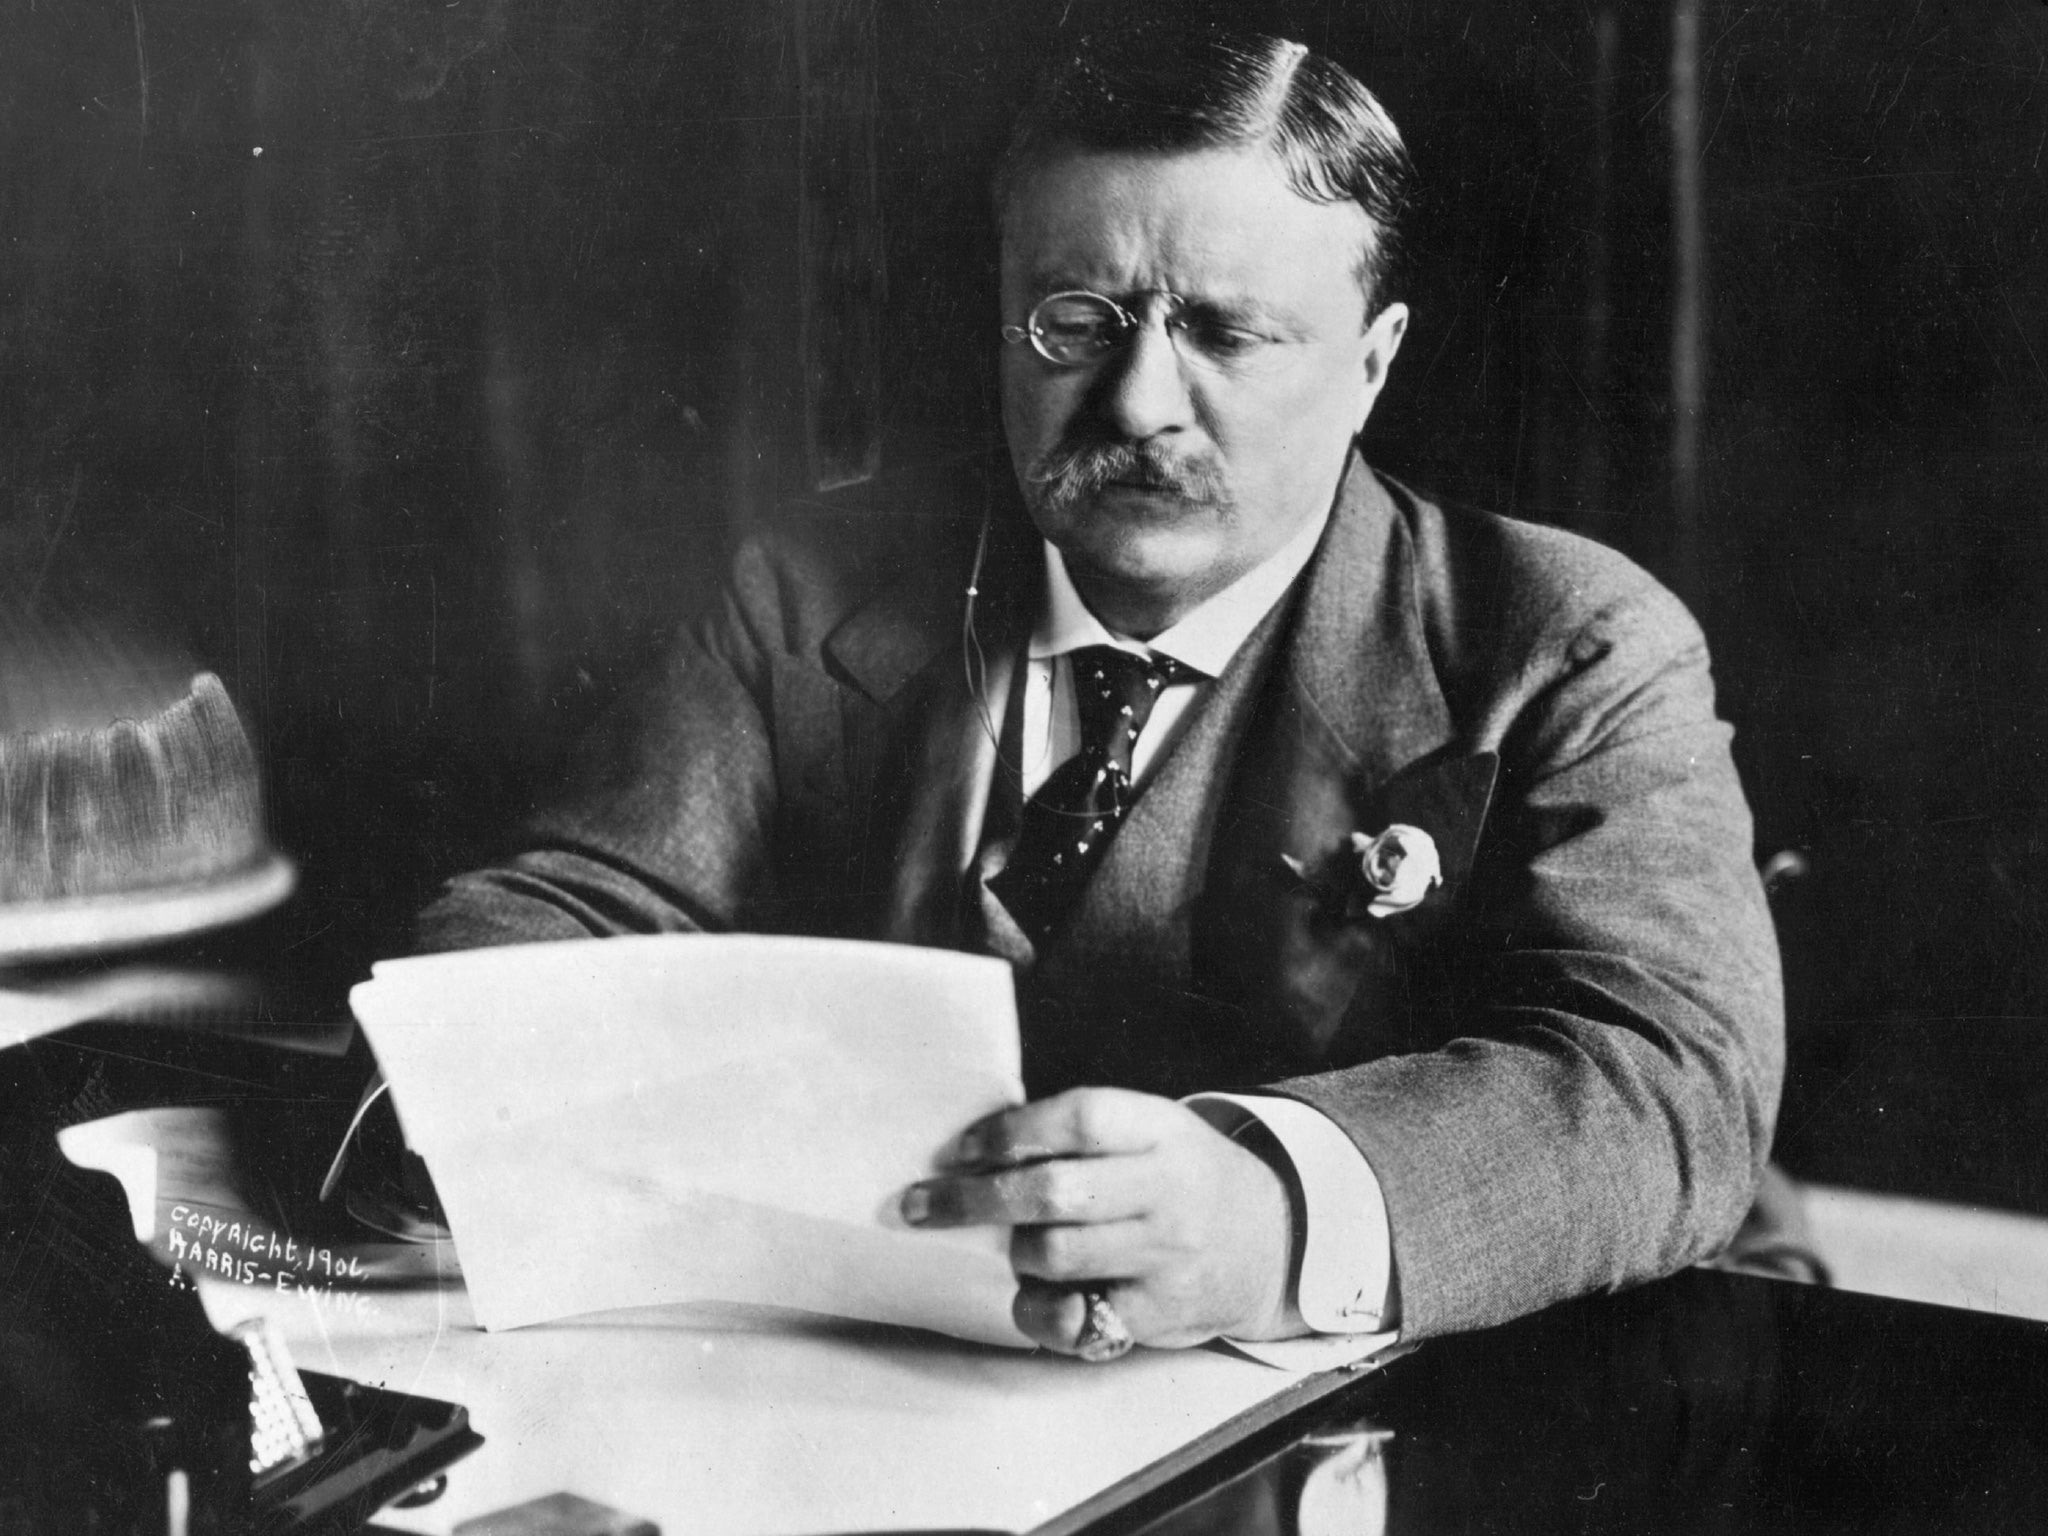 When the energy industry wasn’t working for consumers, Theodore Roosevelt went in hard